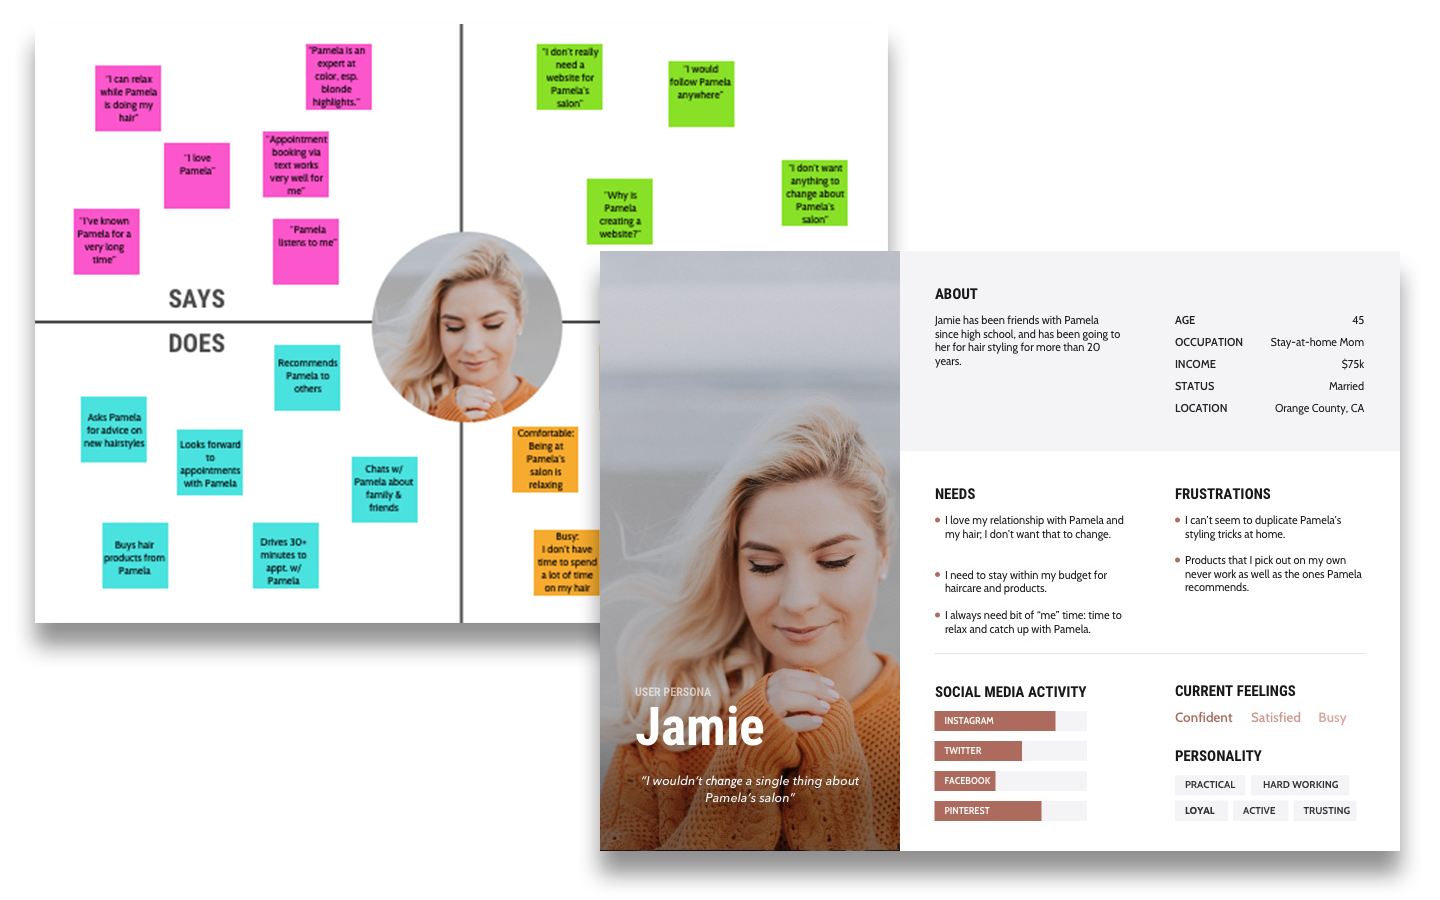 The user persona and empathy map that I created for this project